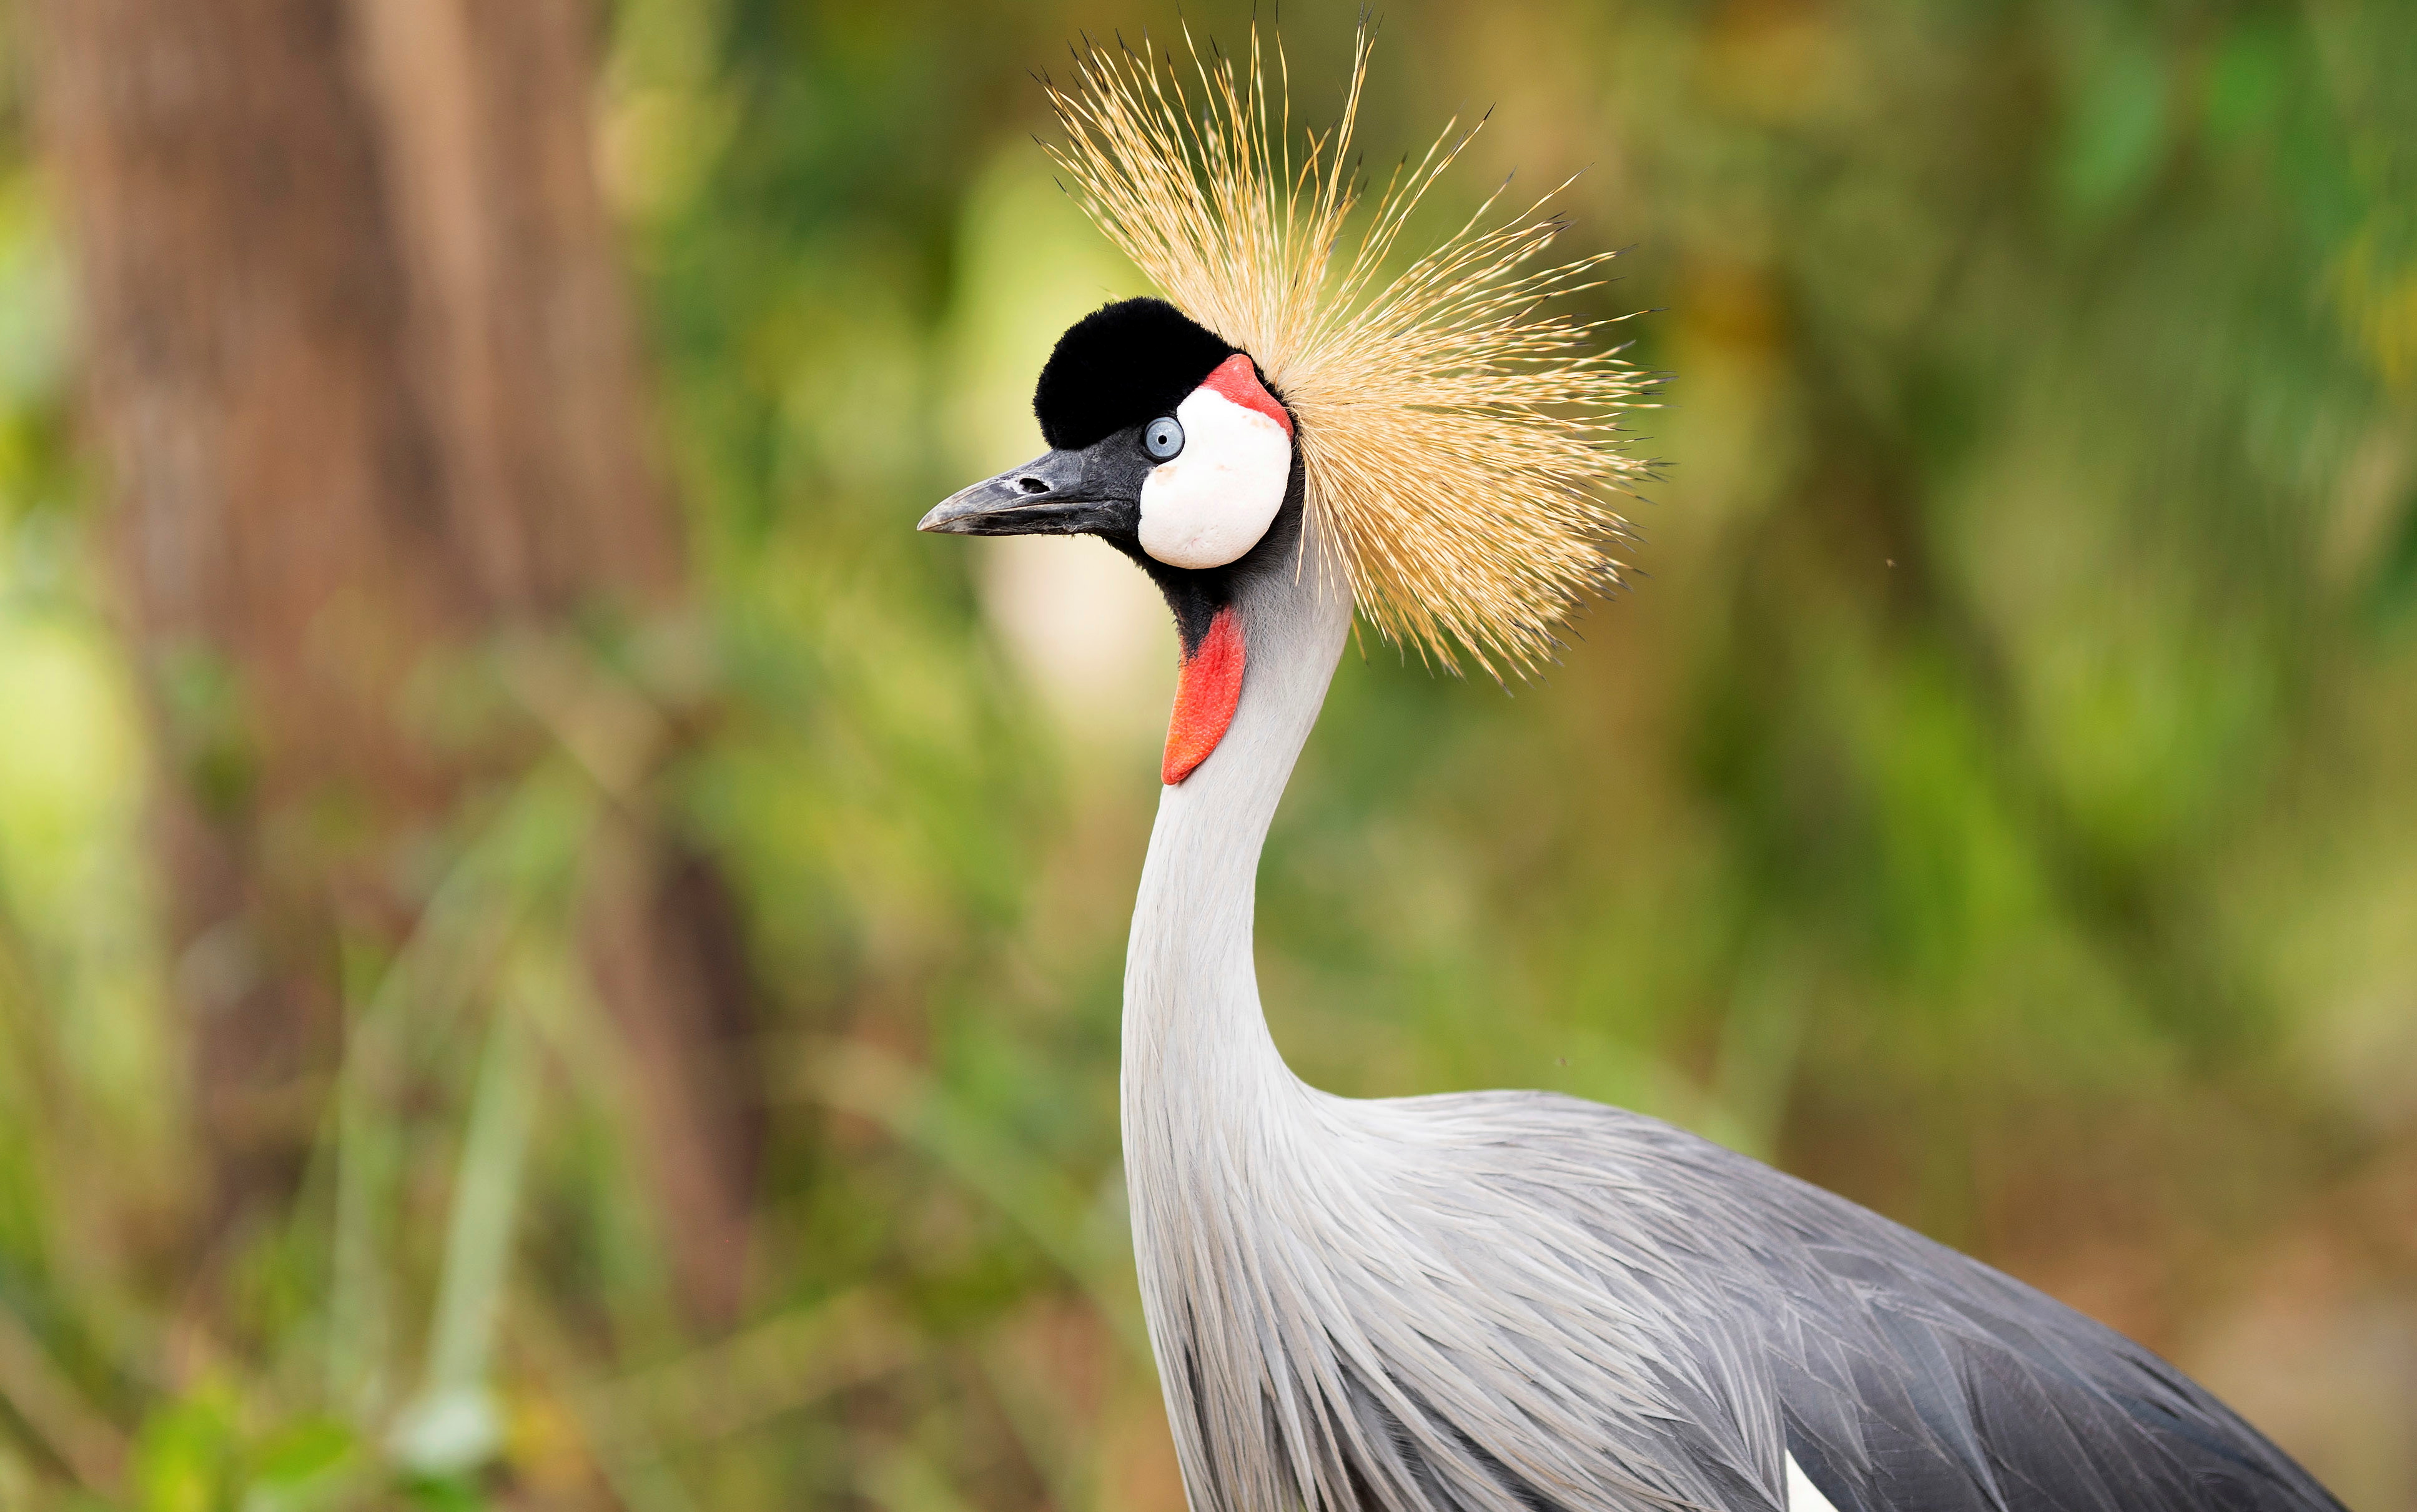 Grey crowned crane is seen at the Umusambi Village, a sanctuary for endangered cranes in Kigali